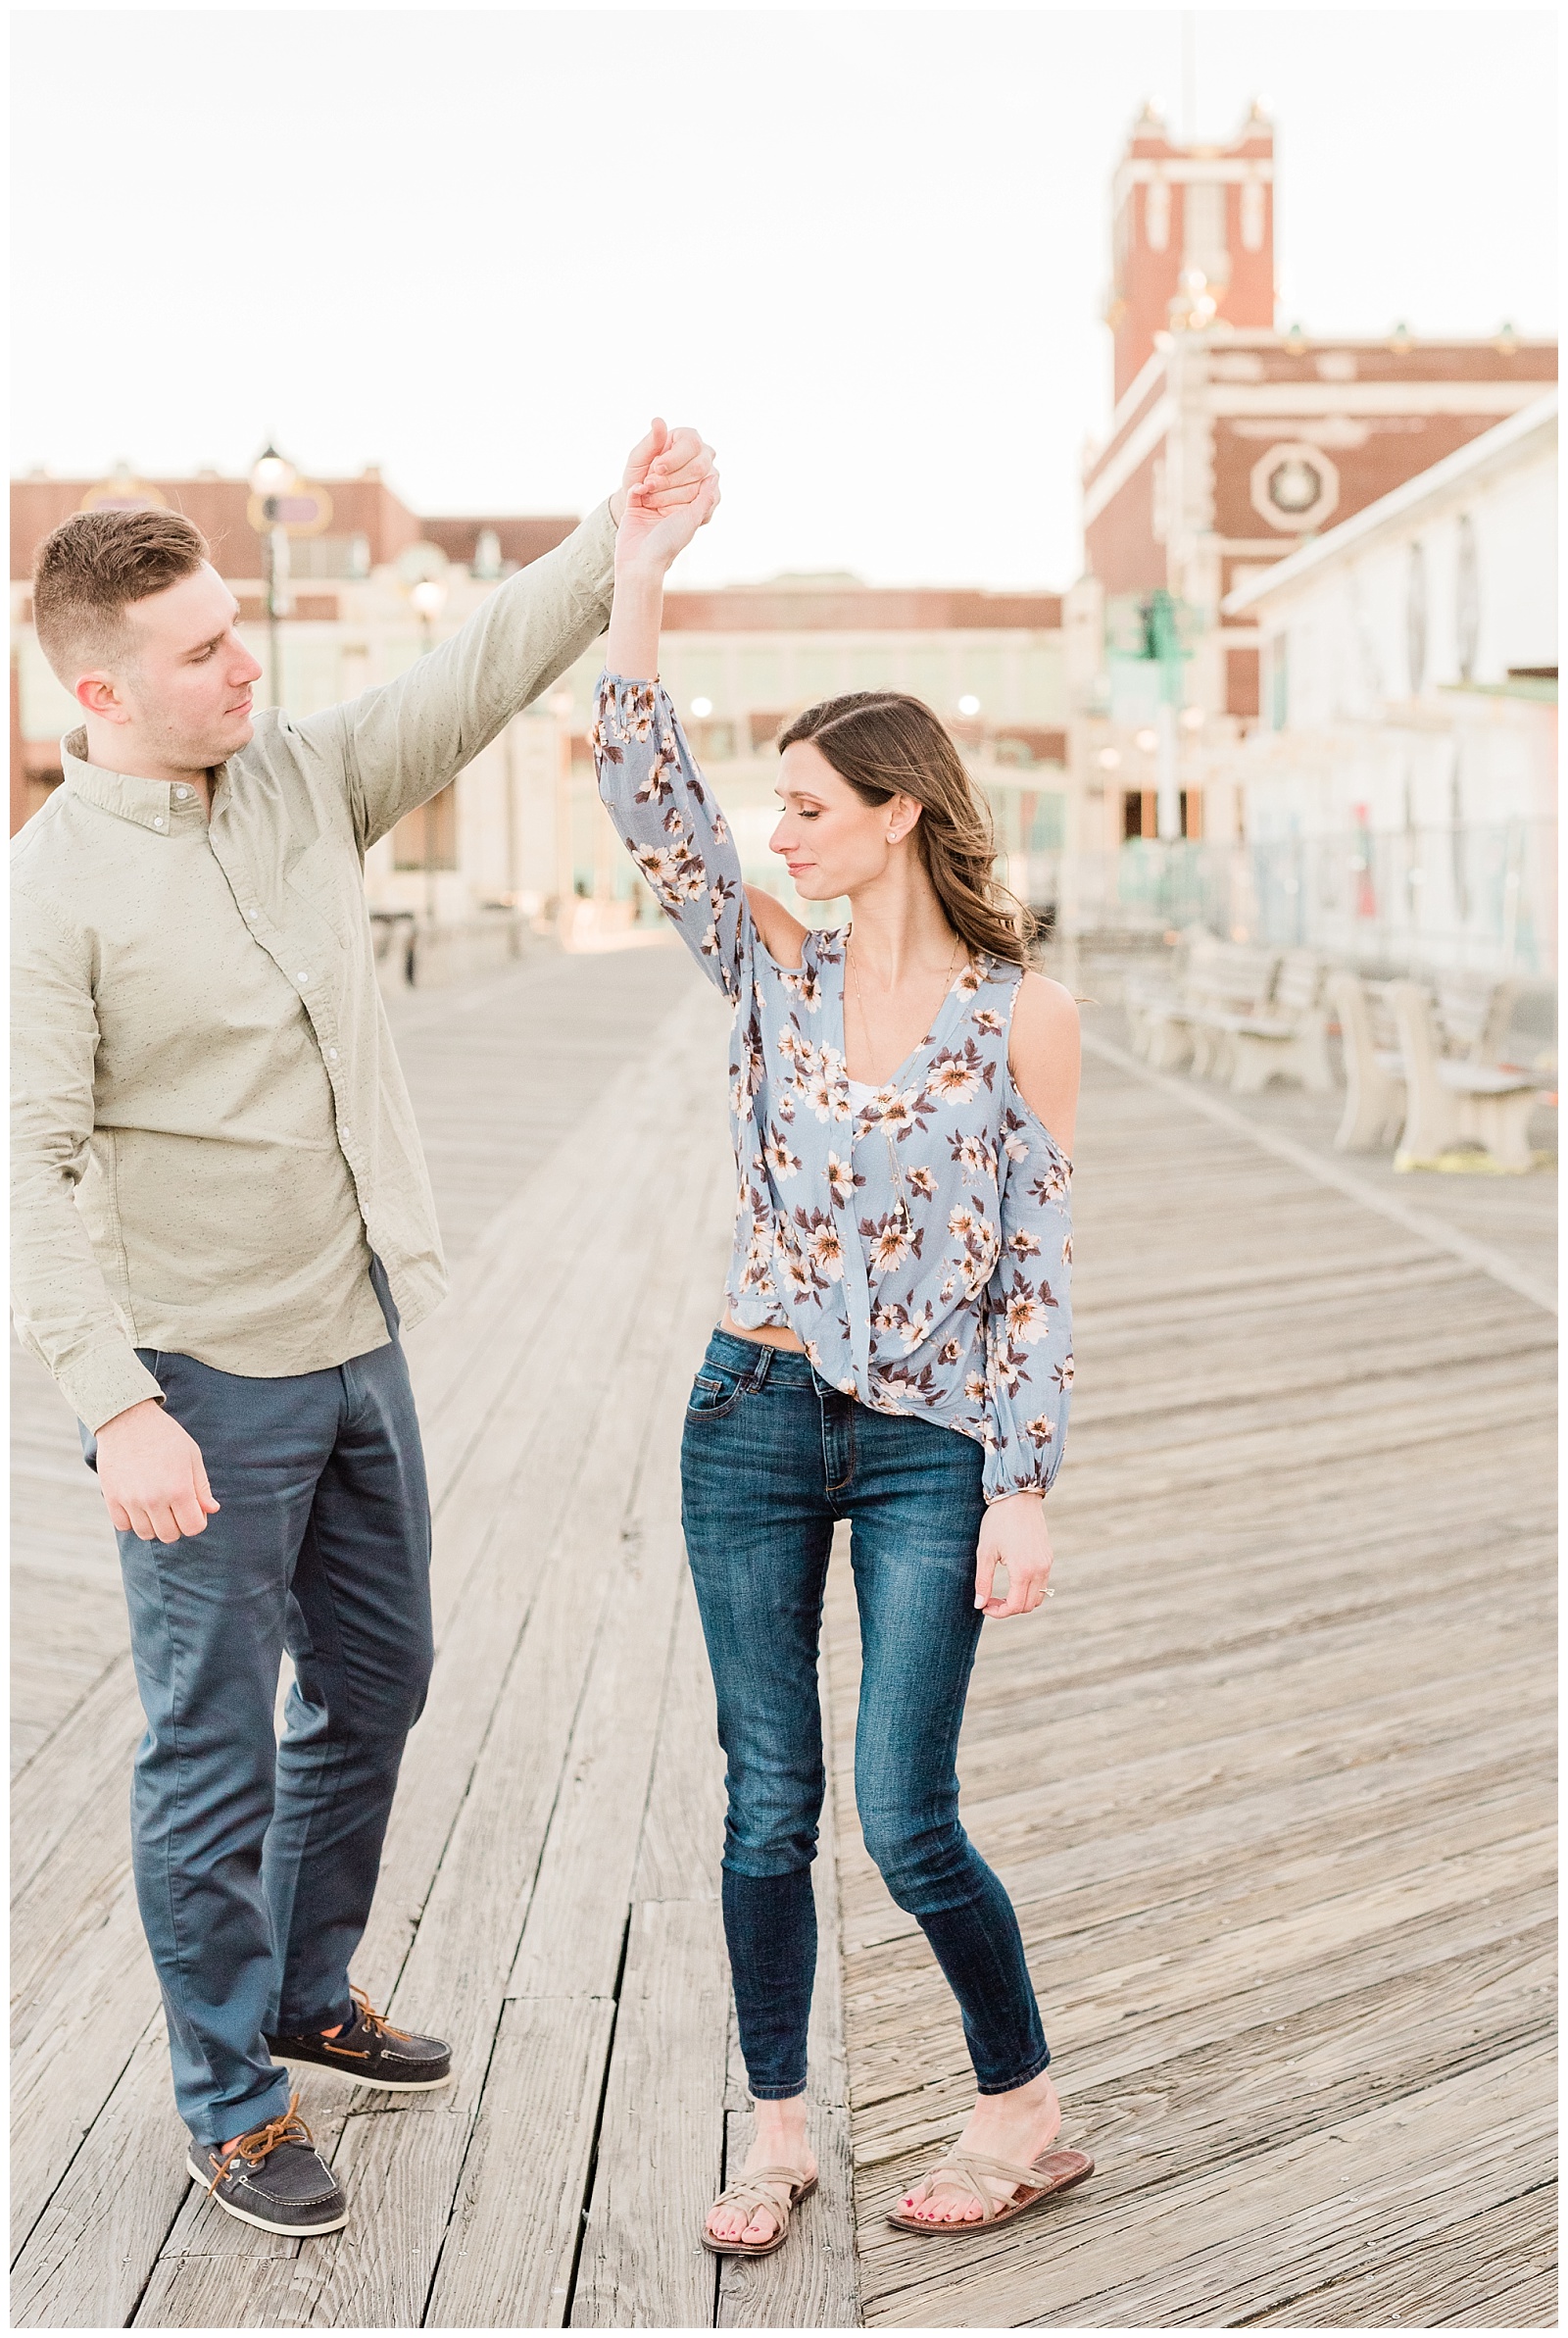 New Jersey, Engagement Session, Asbury Park, NJ, Wedding Photographer, Springtime, Boardwalk, Light and Airy, Golden Hour, Dancing